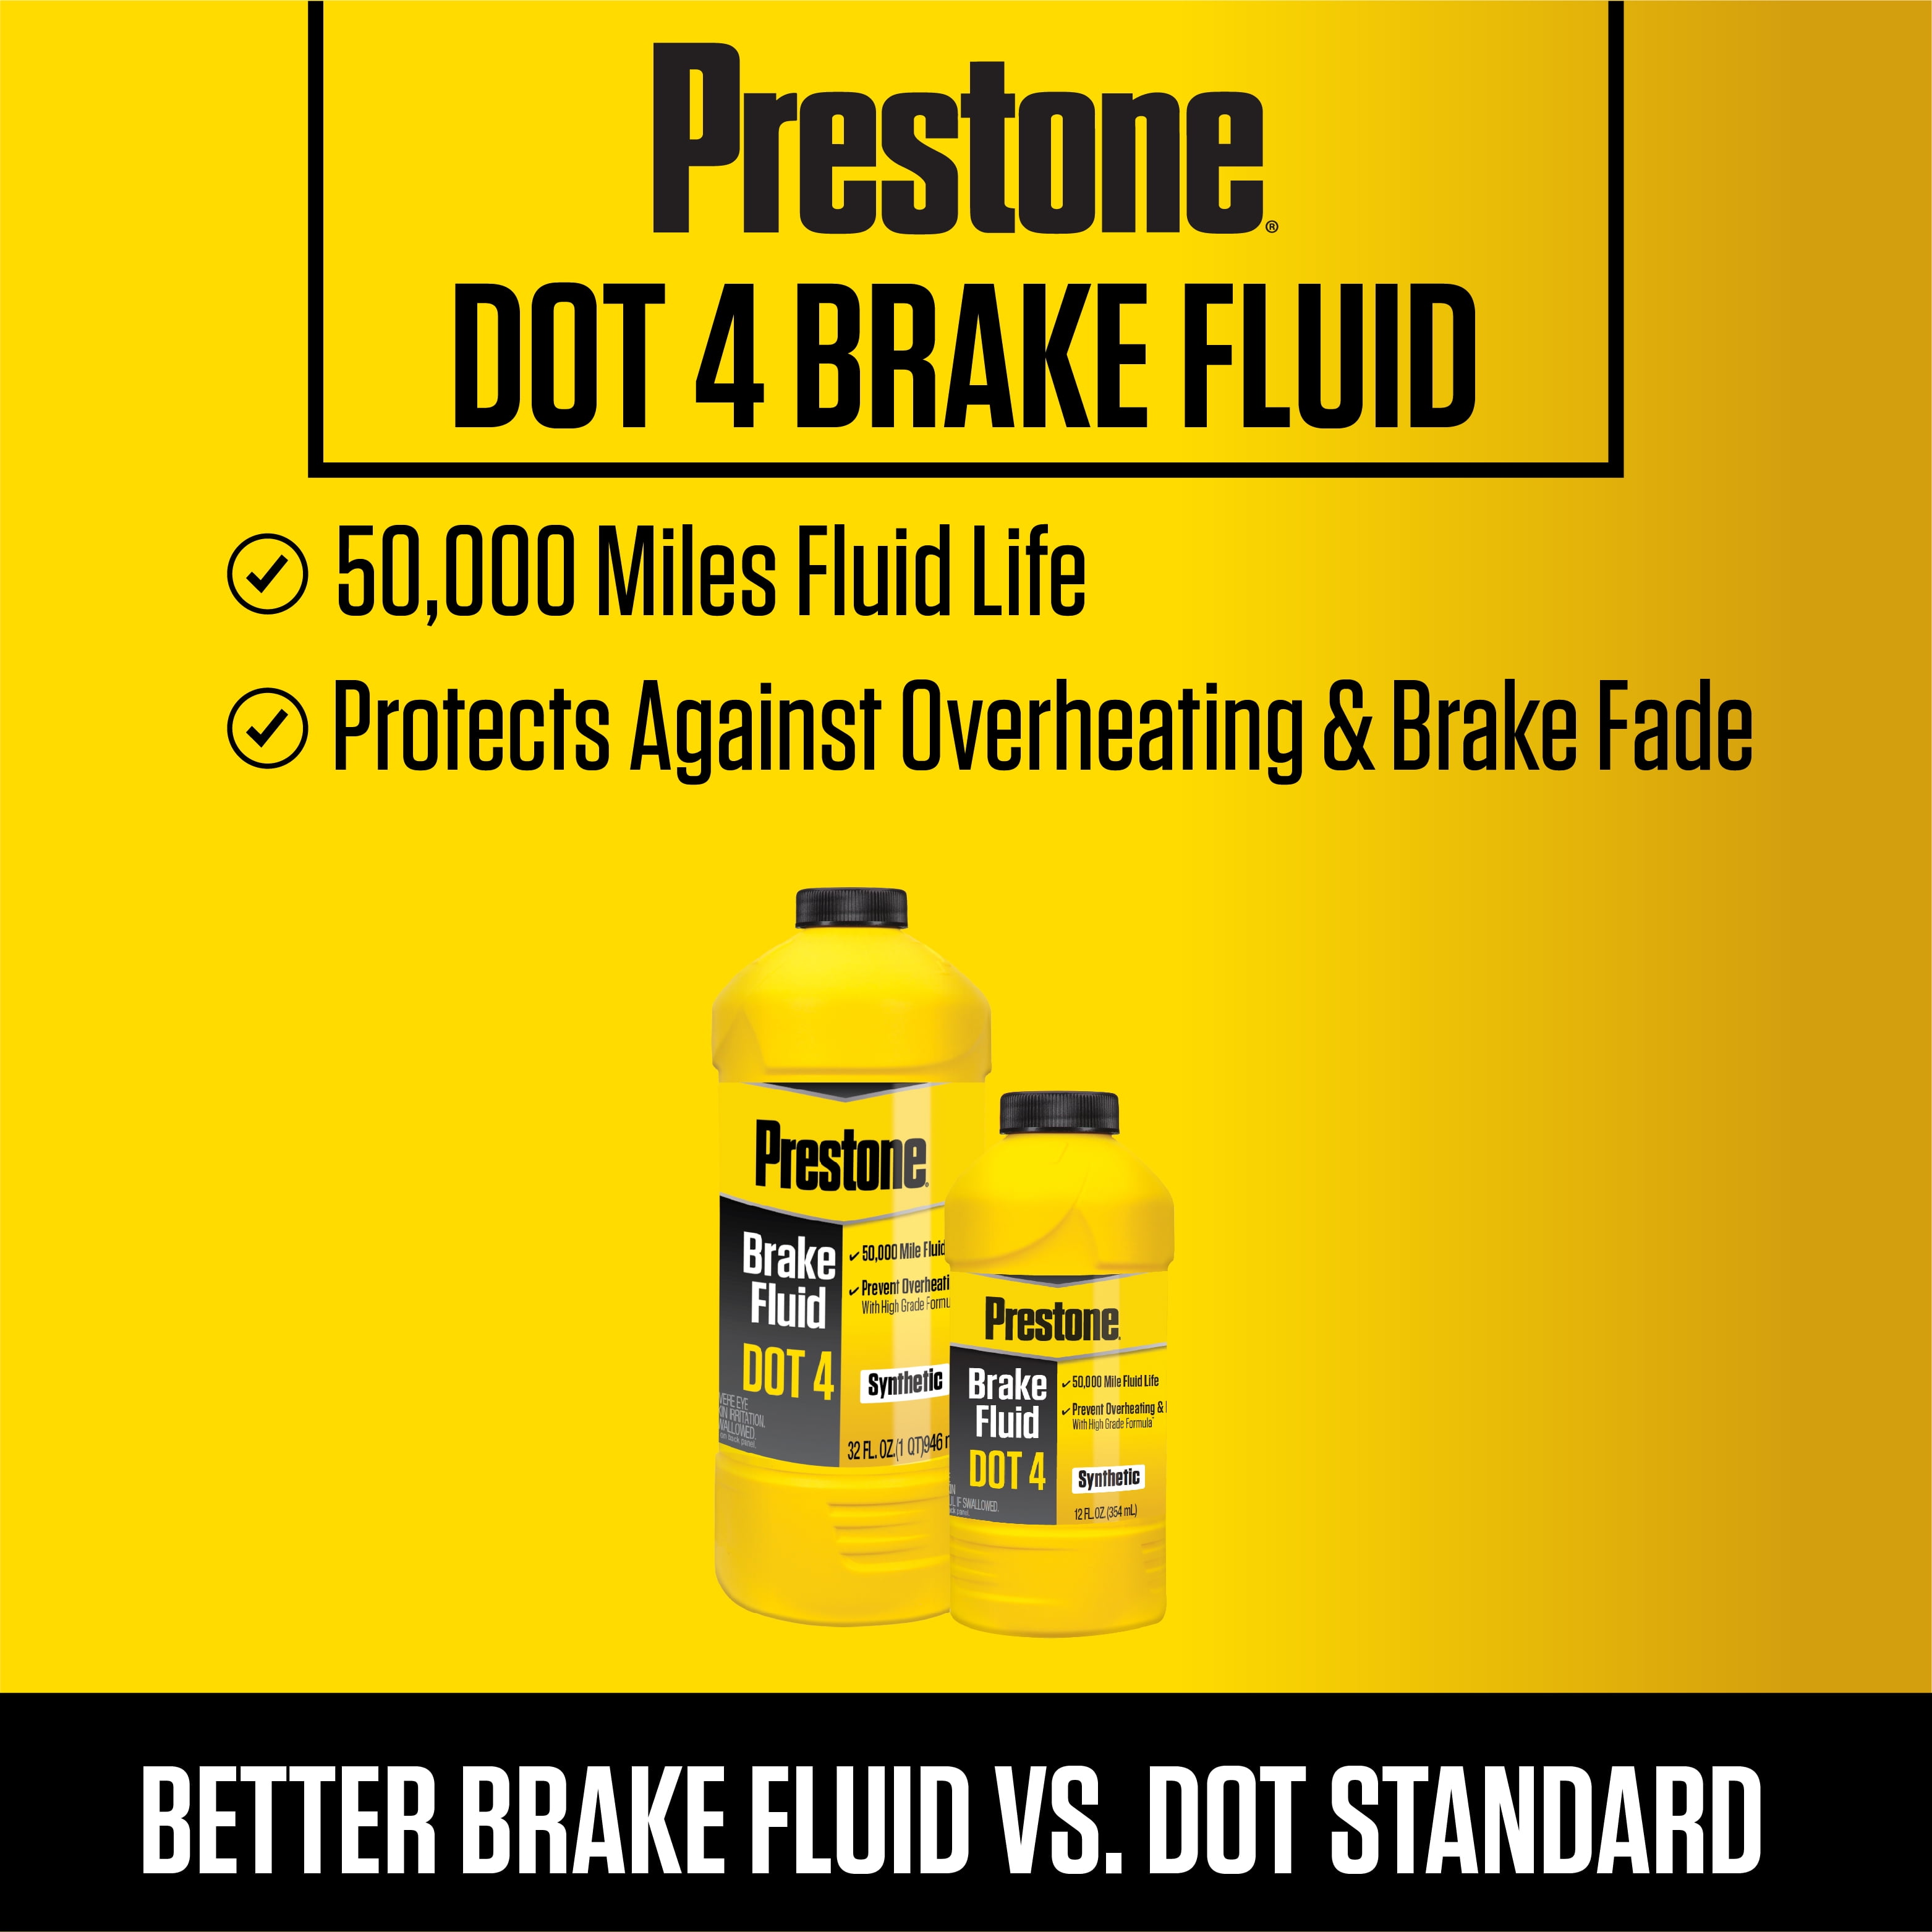 What Is A DOT 4 LV Brake Fluid? (VIDEO)